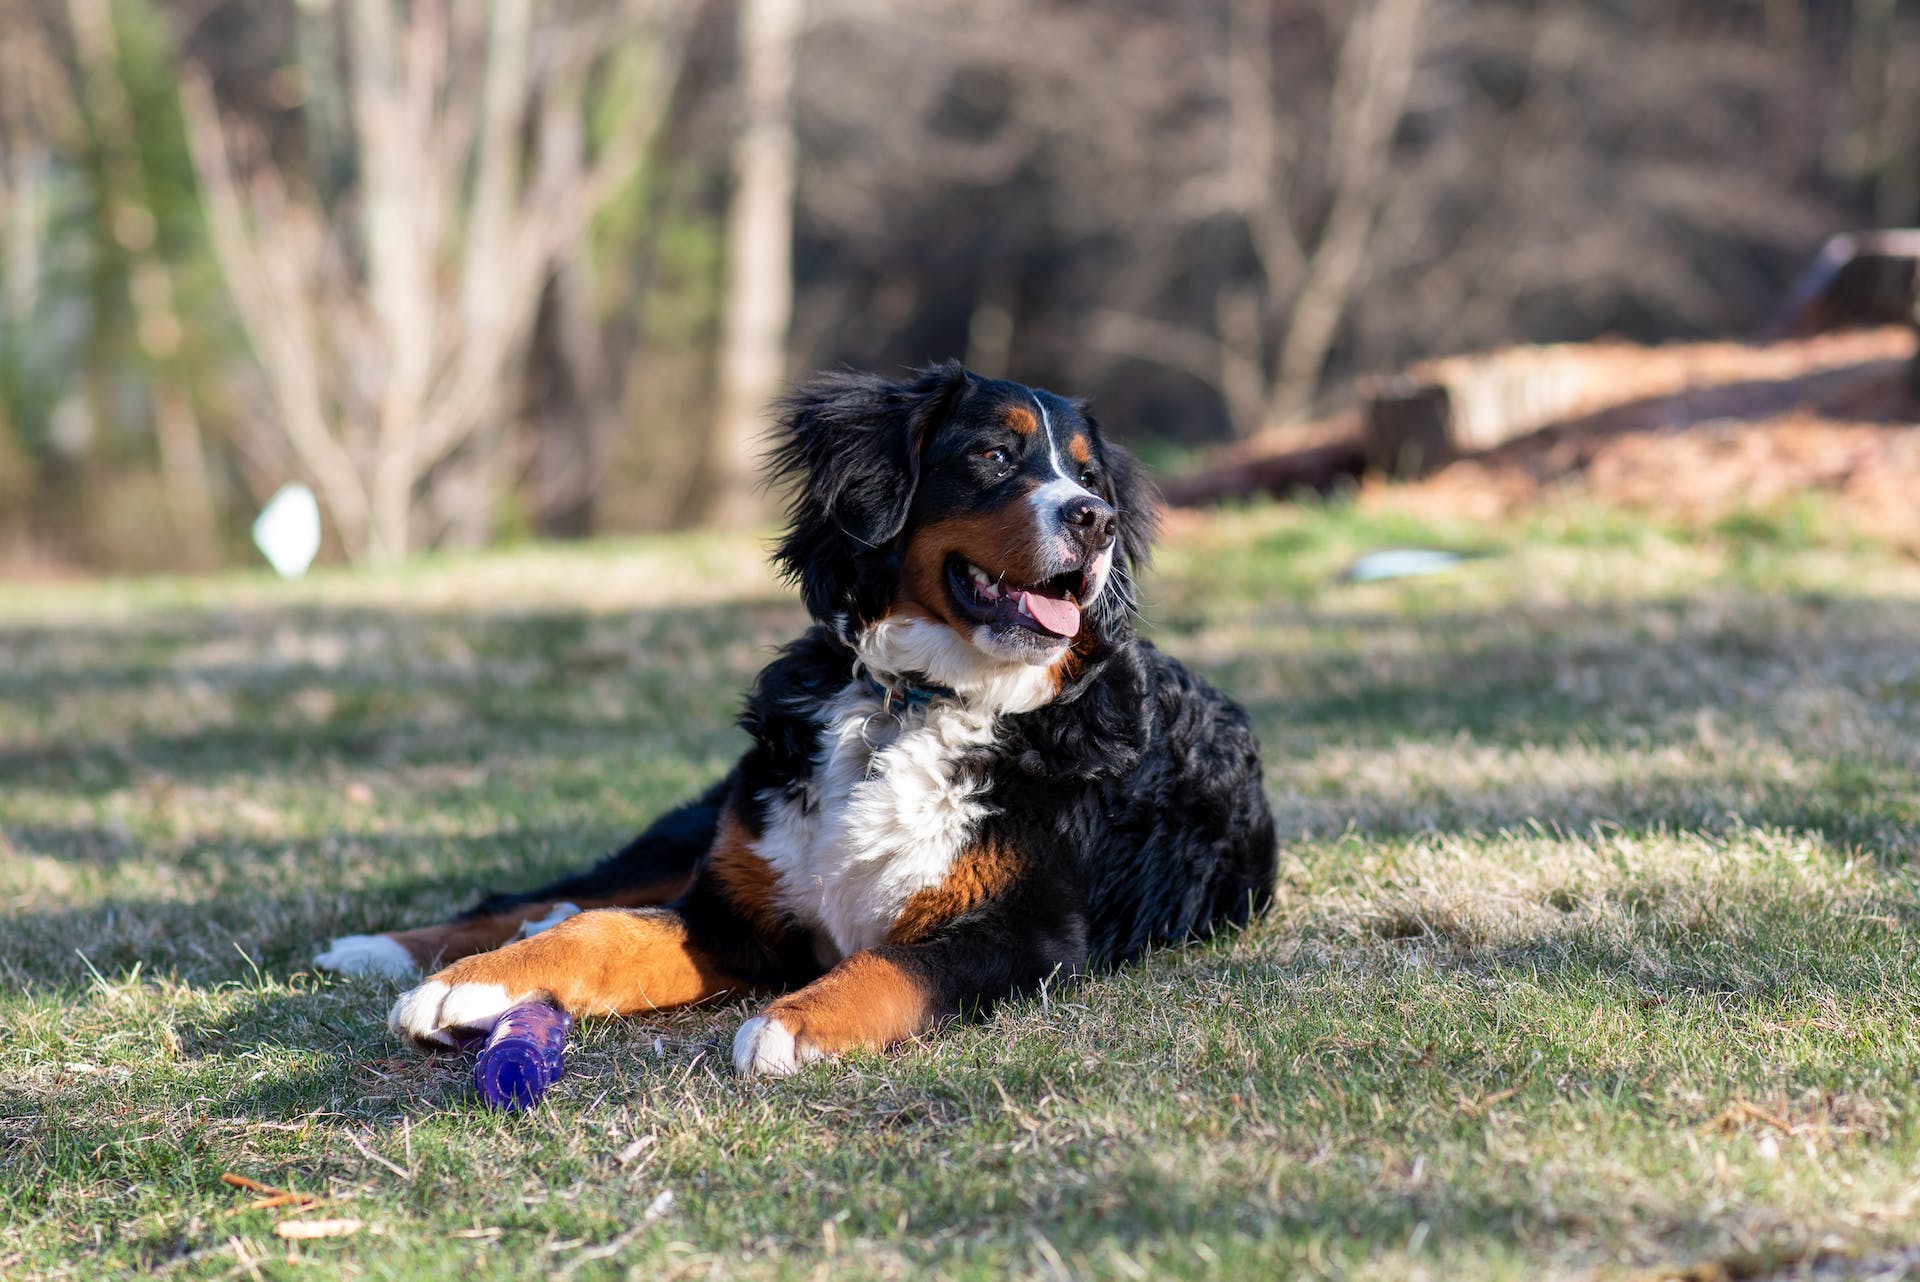 A Bernese mountain dog sitting in a lawn